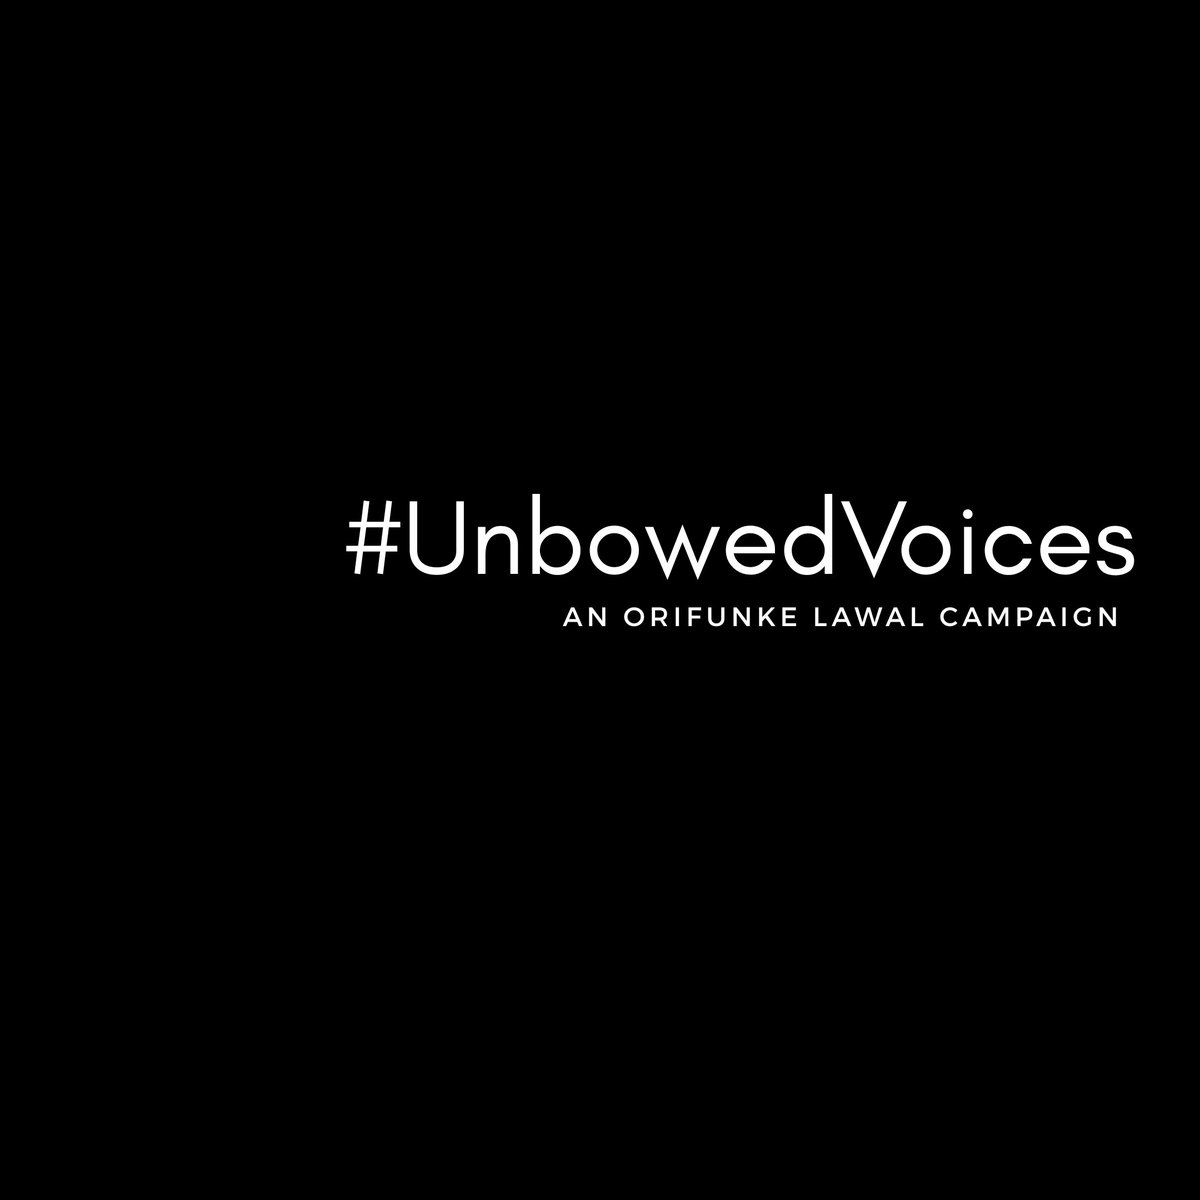  #UnbowedVoices is a storytelling campaign that shares the stories of feminist women and why they believe in gender equality. It will run through March/April.Read the previous story on  #UnbowedVoices here:  http://orifunkelawal.com/tosin-akingba-unbowedvoices